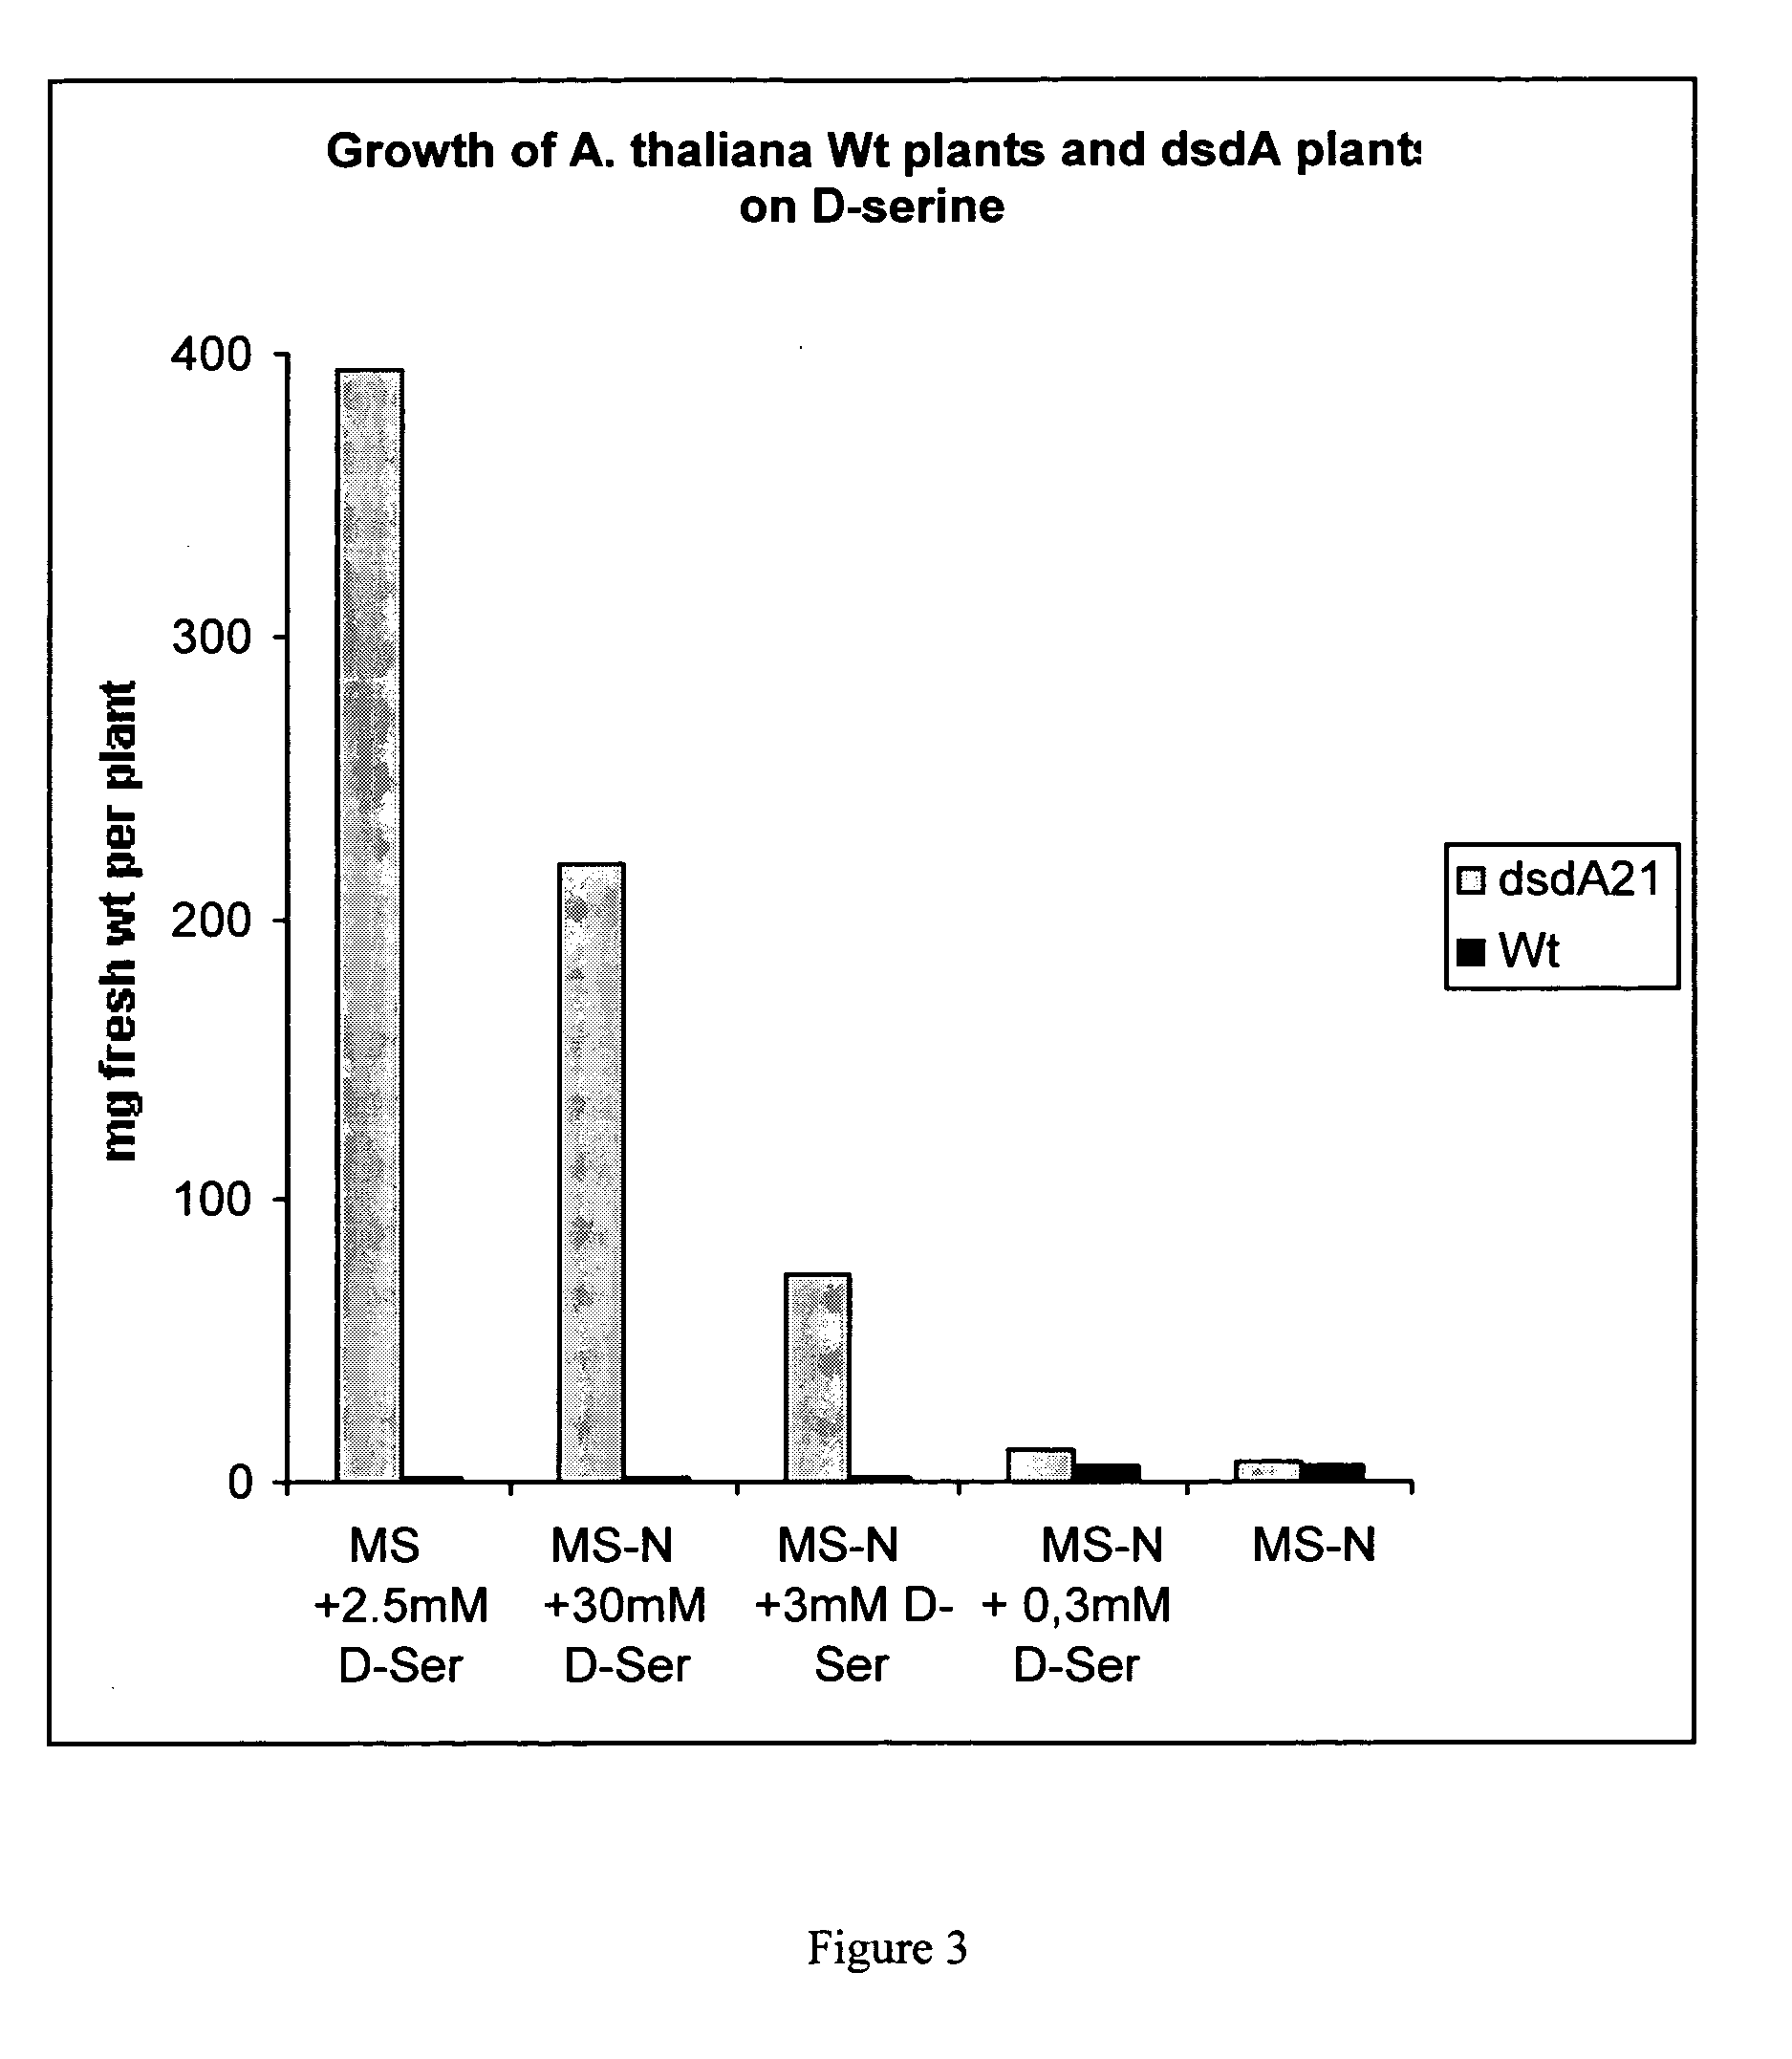 Selective plant growth using D-amino acids